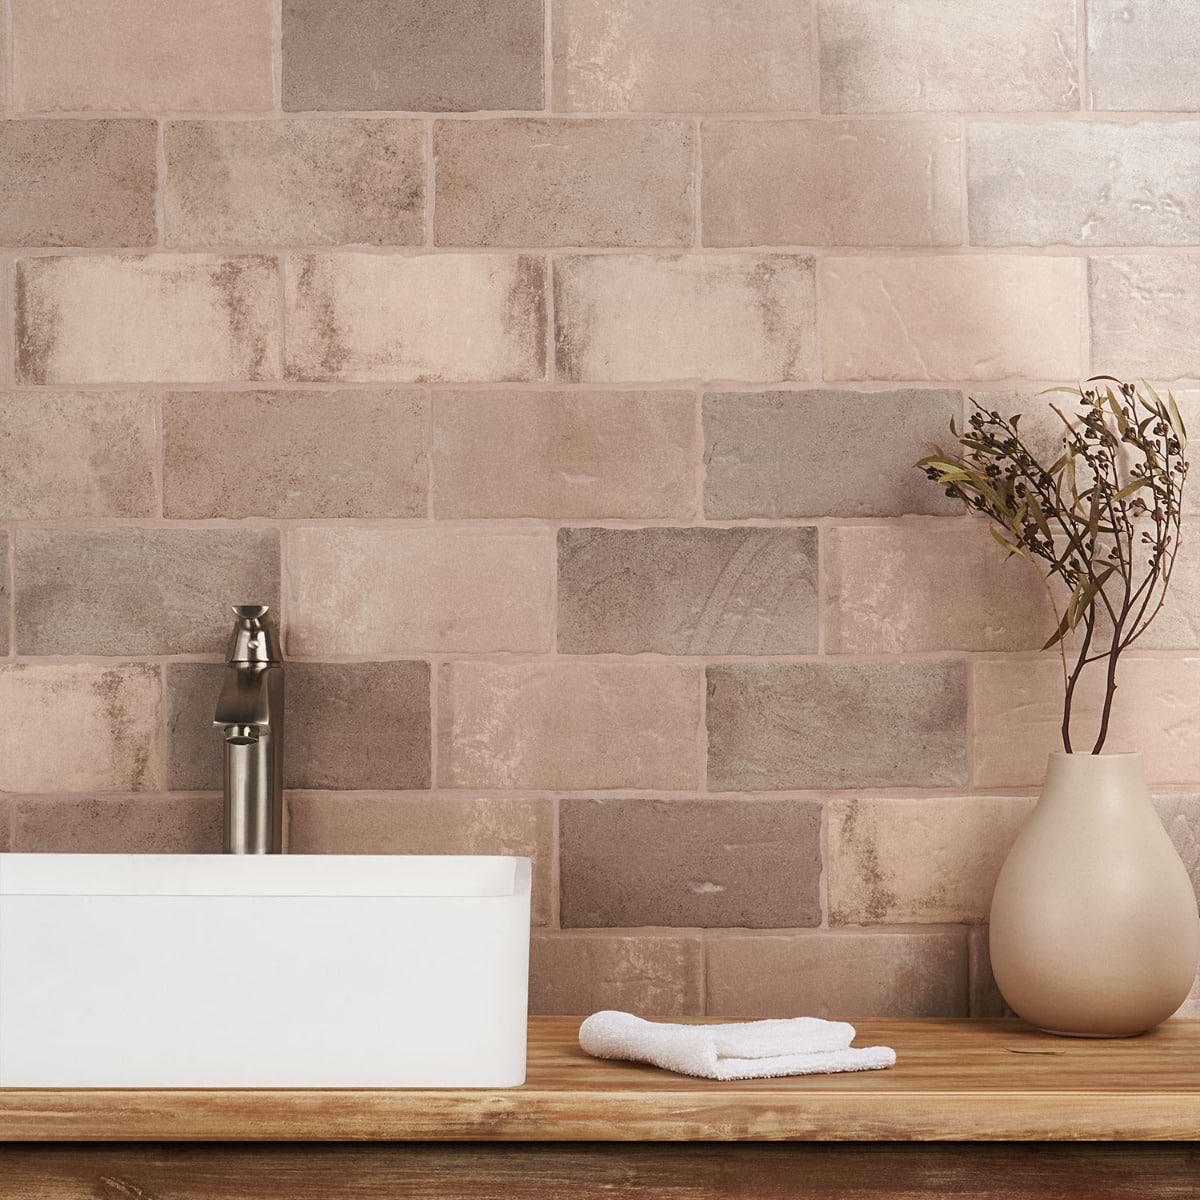 Add a little warmth to your bathroom with this taupe/brown shower